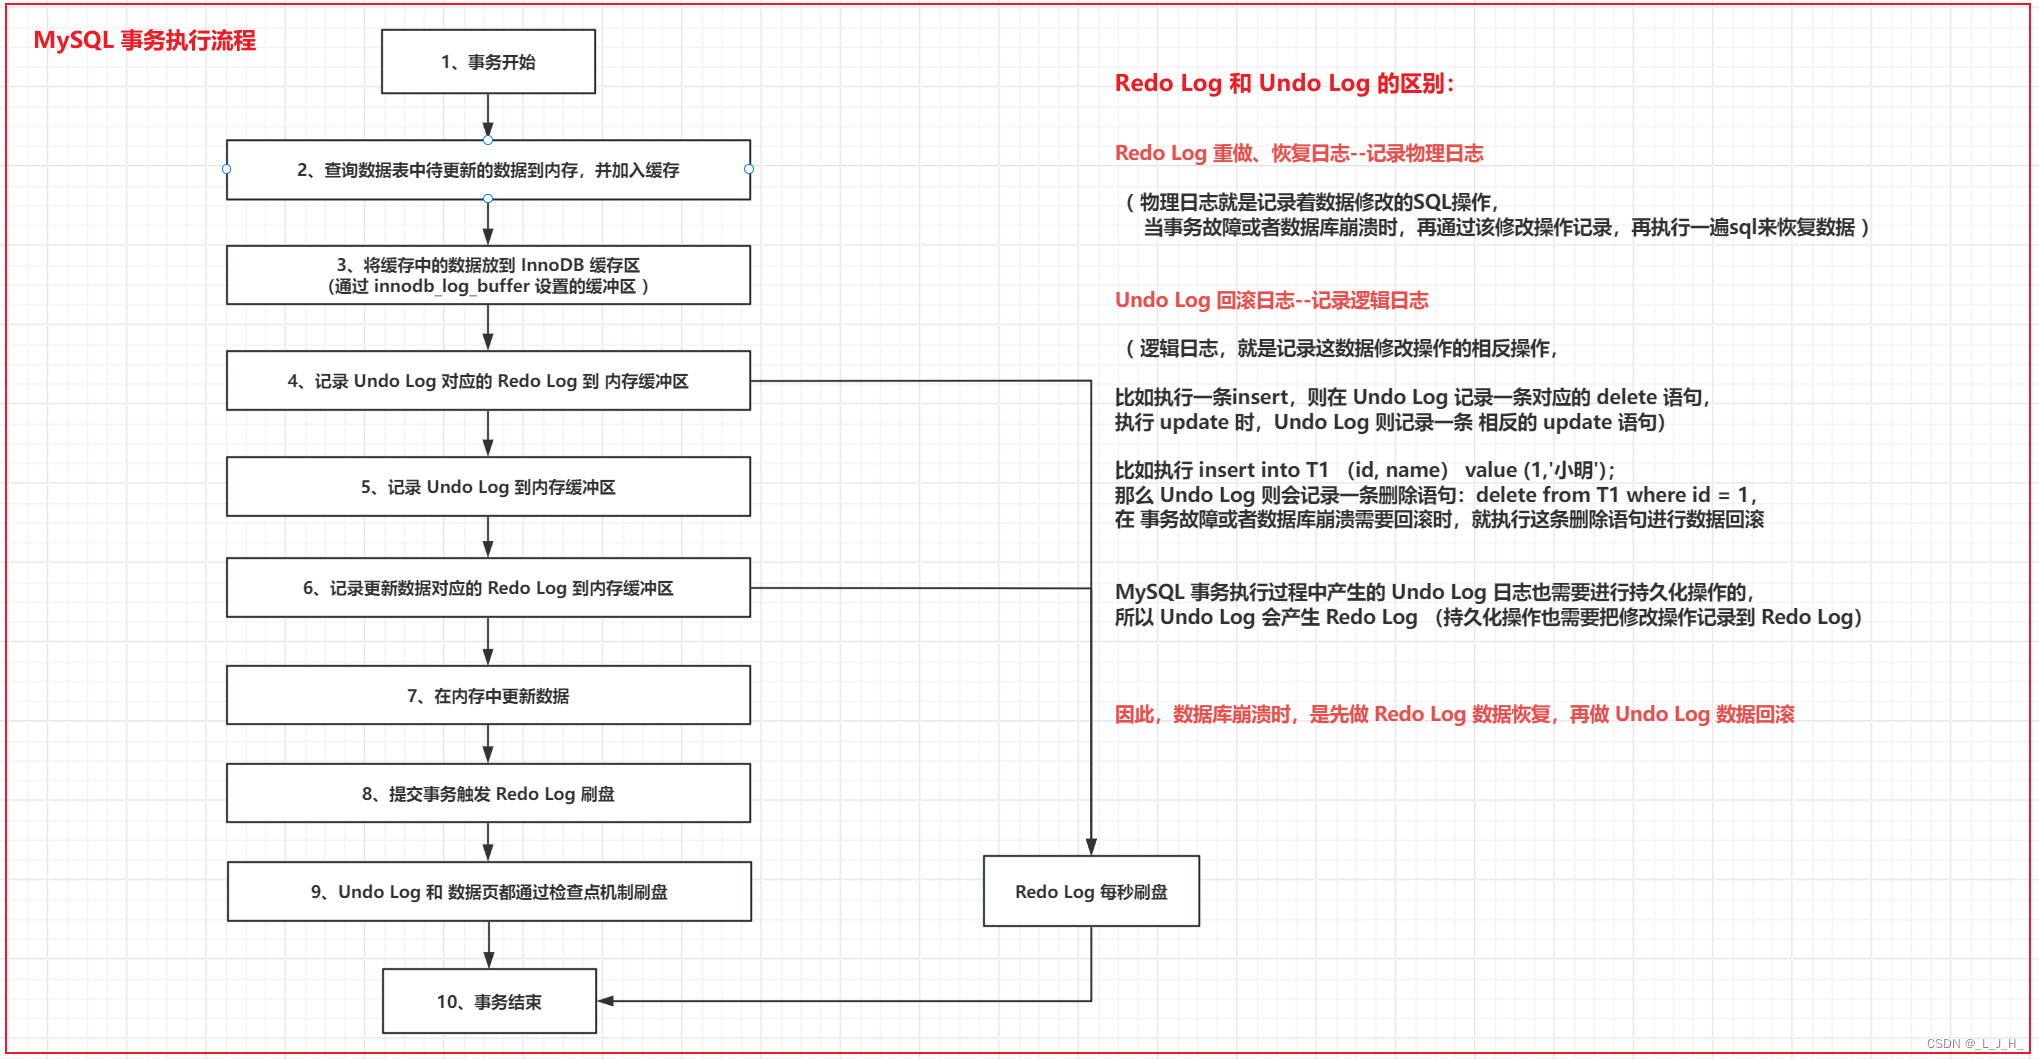 <span style='color:red;'>深入</span><span style='color:red;'>理解</span>分布式事务⑧ ----＞MySQL 事务<span style='color:red;'>的</span>实现原理 之 MySQL 事务<span style='color:red;'>流程</span>（MySQL 事务<span style='color:red;'>执行</span><span style='color:red;'>流程</span> 和 恢复<span style='color:red;'>流程</span>）详解